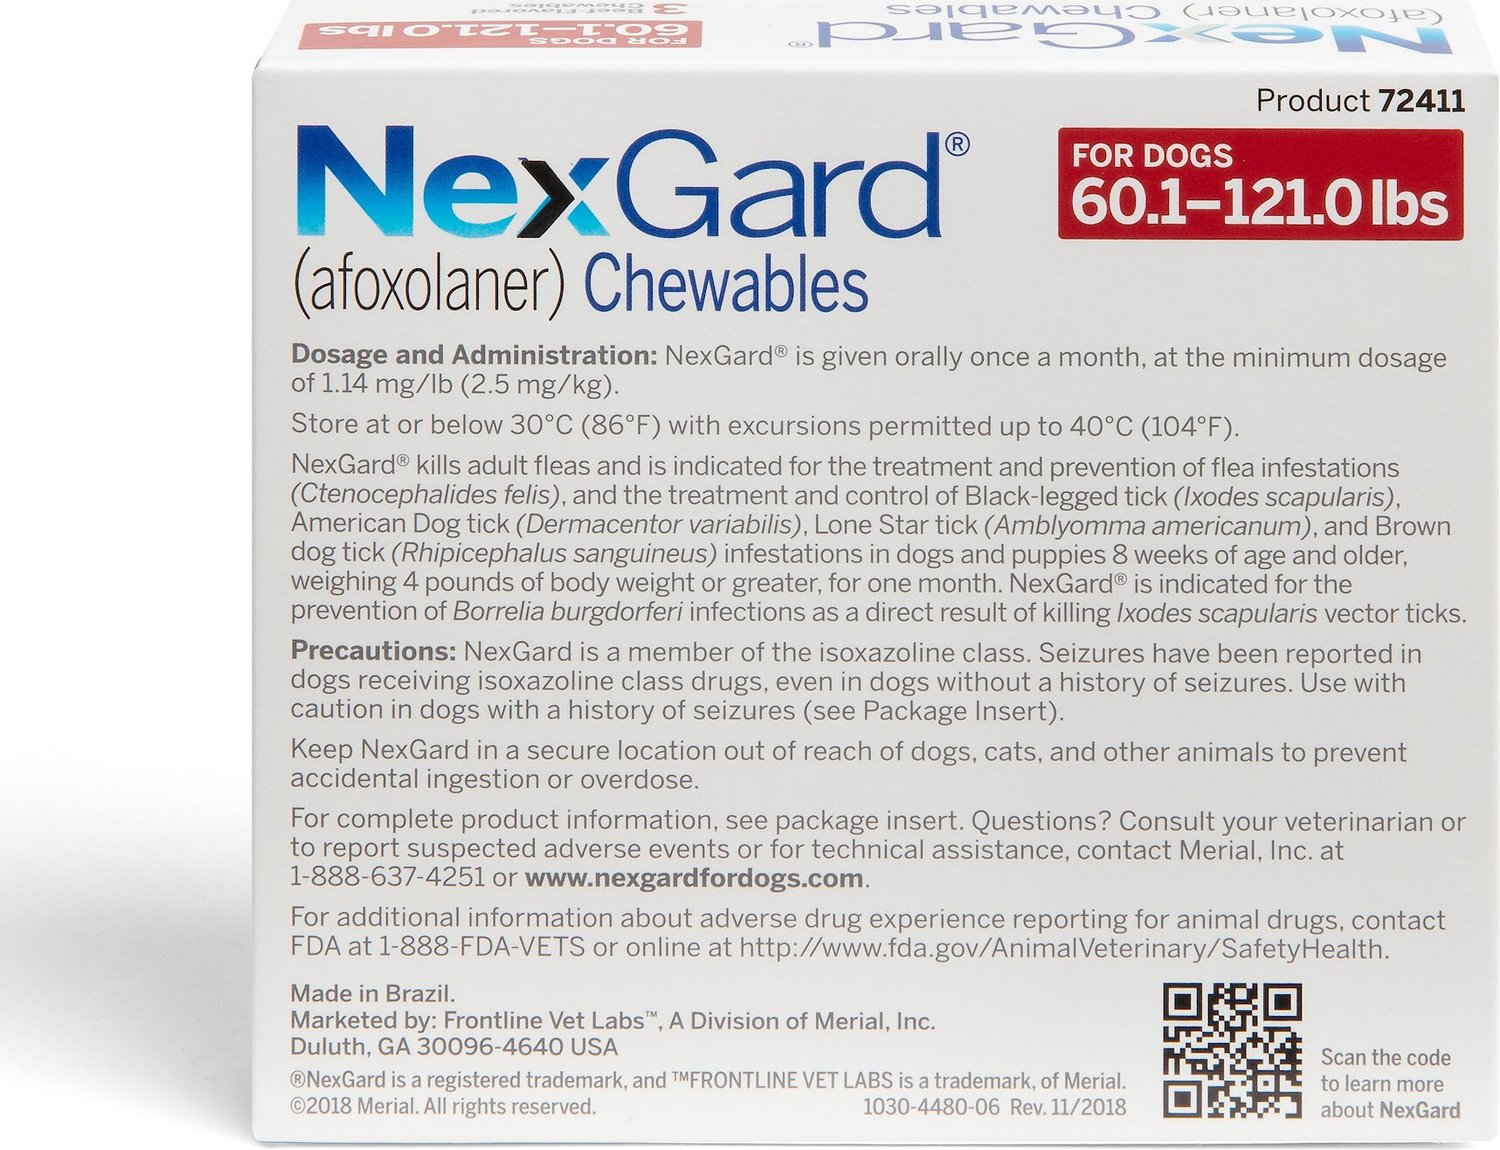 NexGard Chewable Tablets for Dogs, 60.1121 lbs, 3 treatments (Red Box